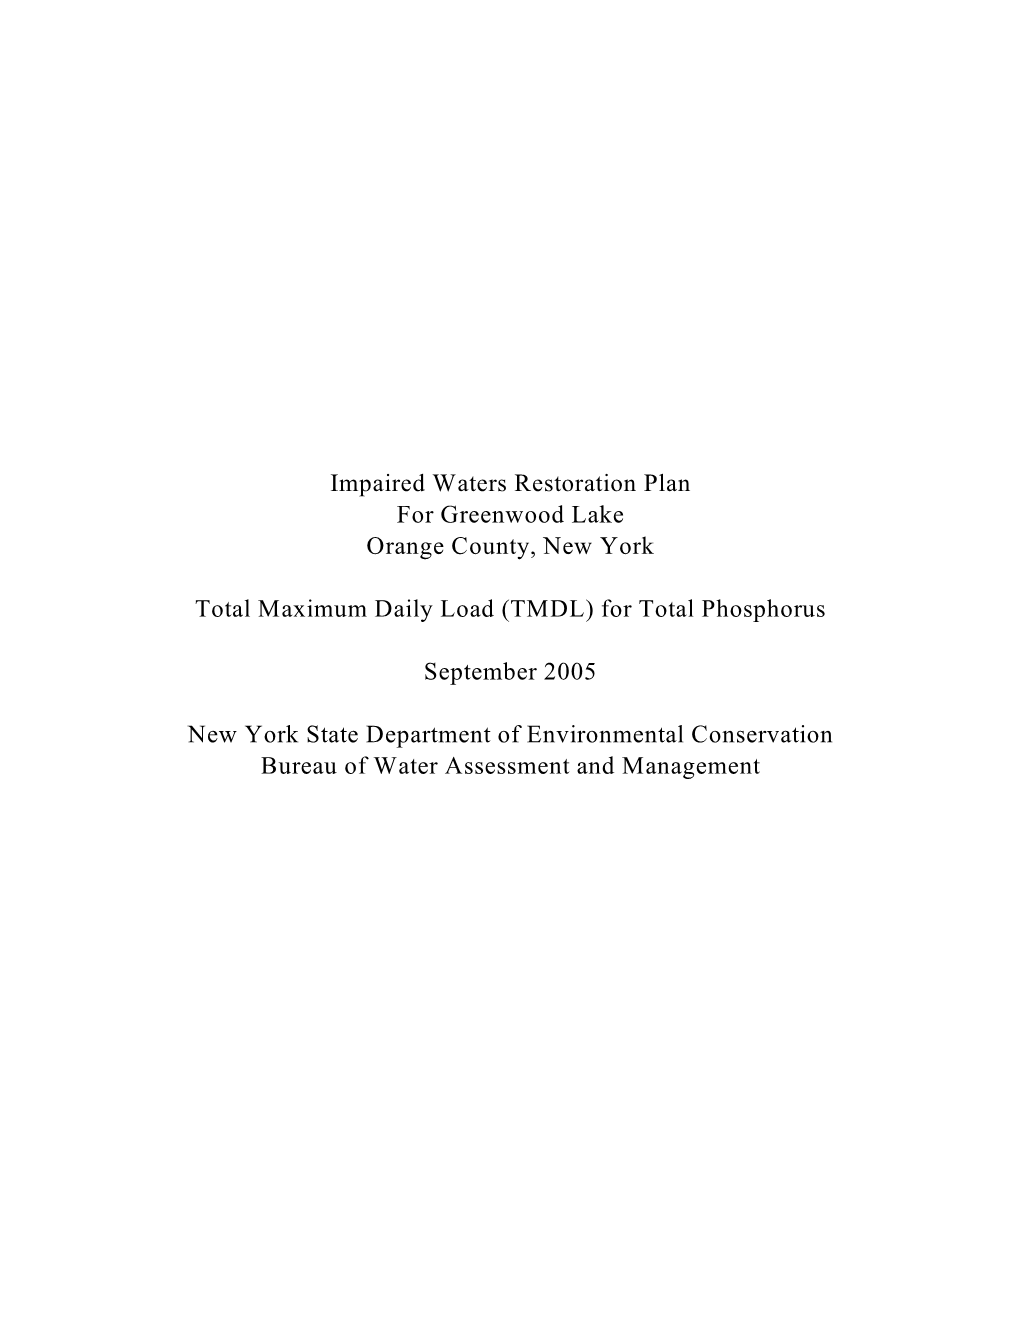 Impaired Waters Restoration Plan for Greenwood Lake: TMDL For